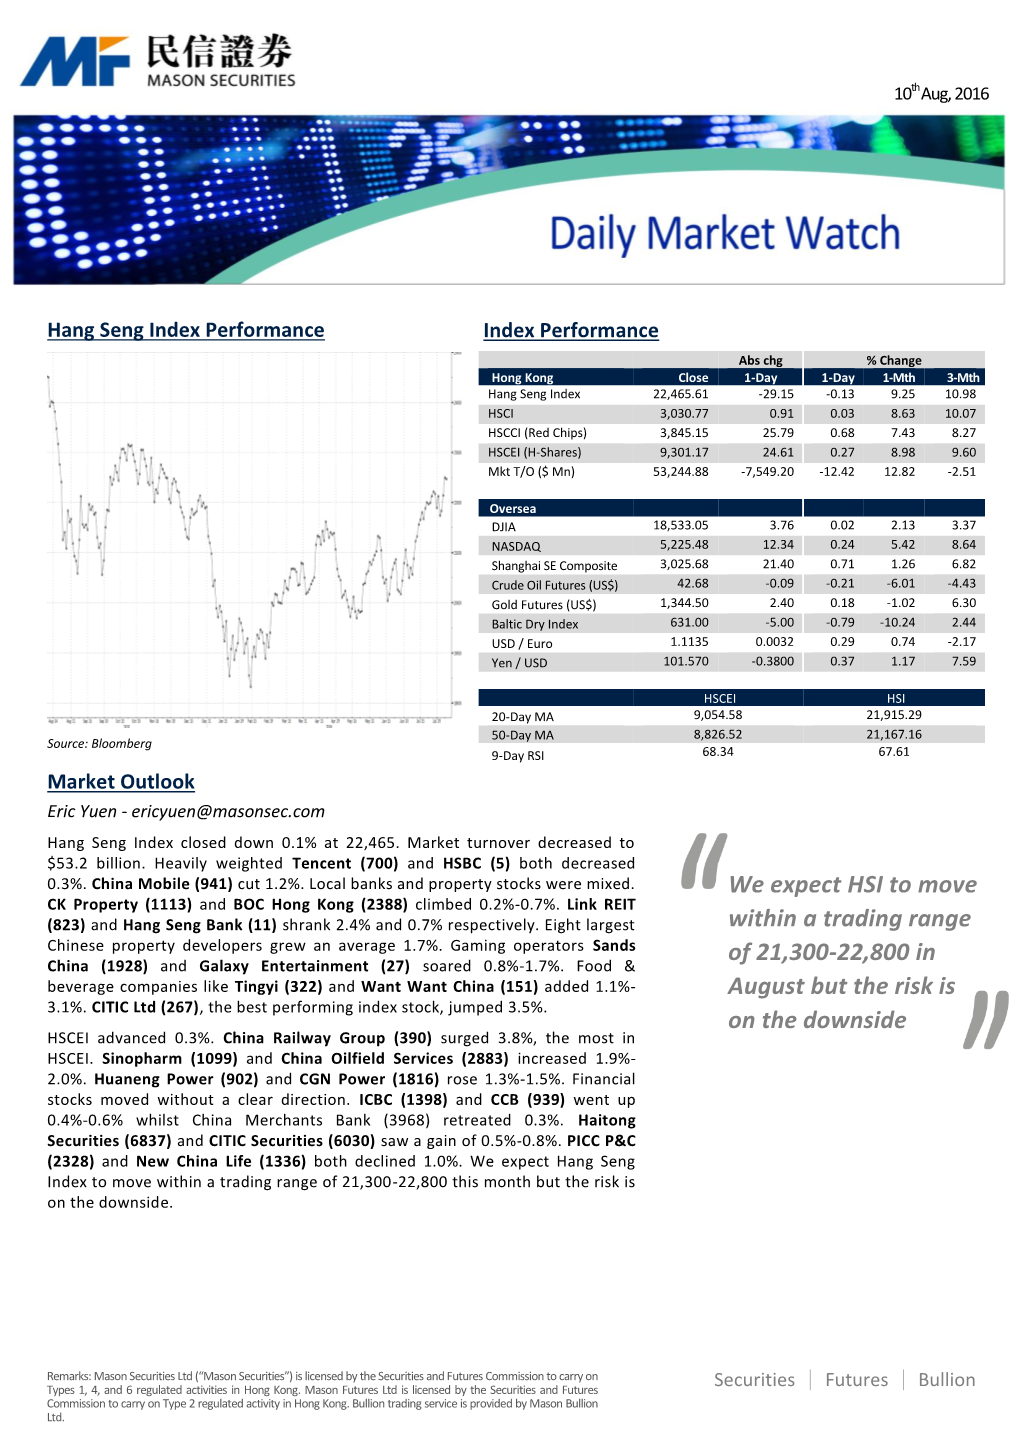 We Expect HSI to Move Within a Trading Range of 21,300-22,800 In